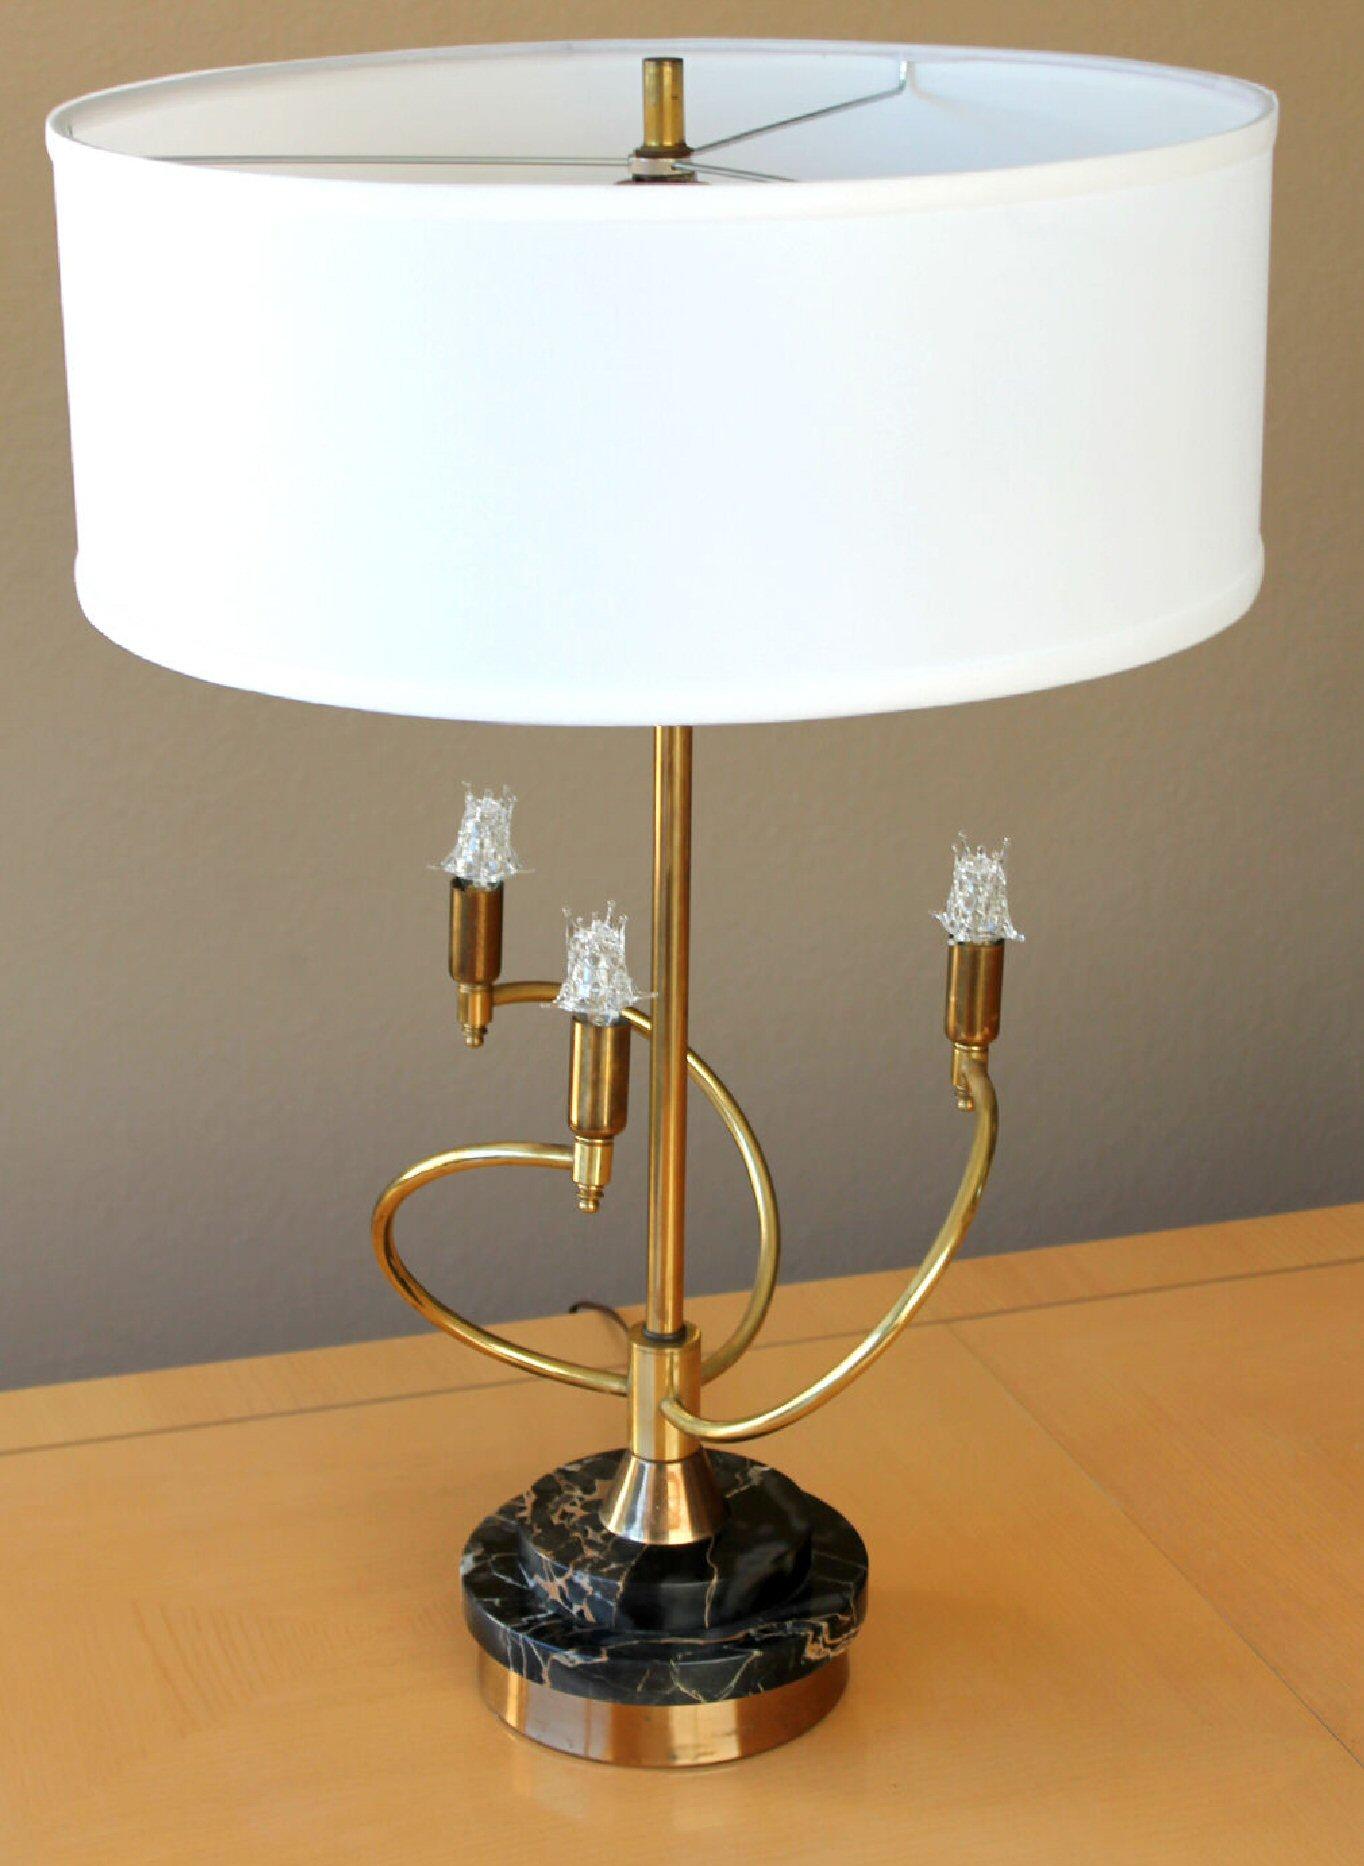 Hand-Painted Rare Mutual Sunset 4-Light Mid Century Modern Italian Marble Table Lamp 1950s For Sale